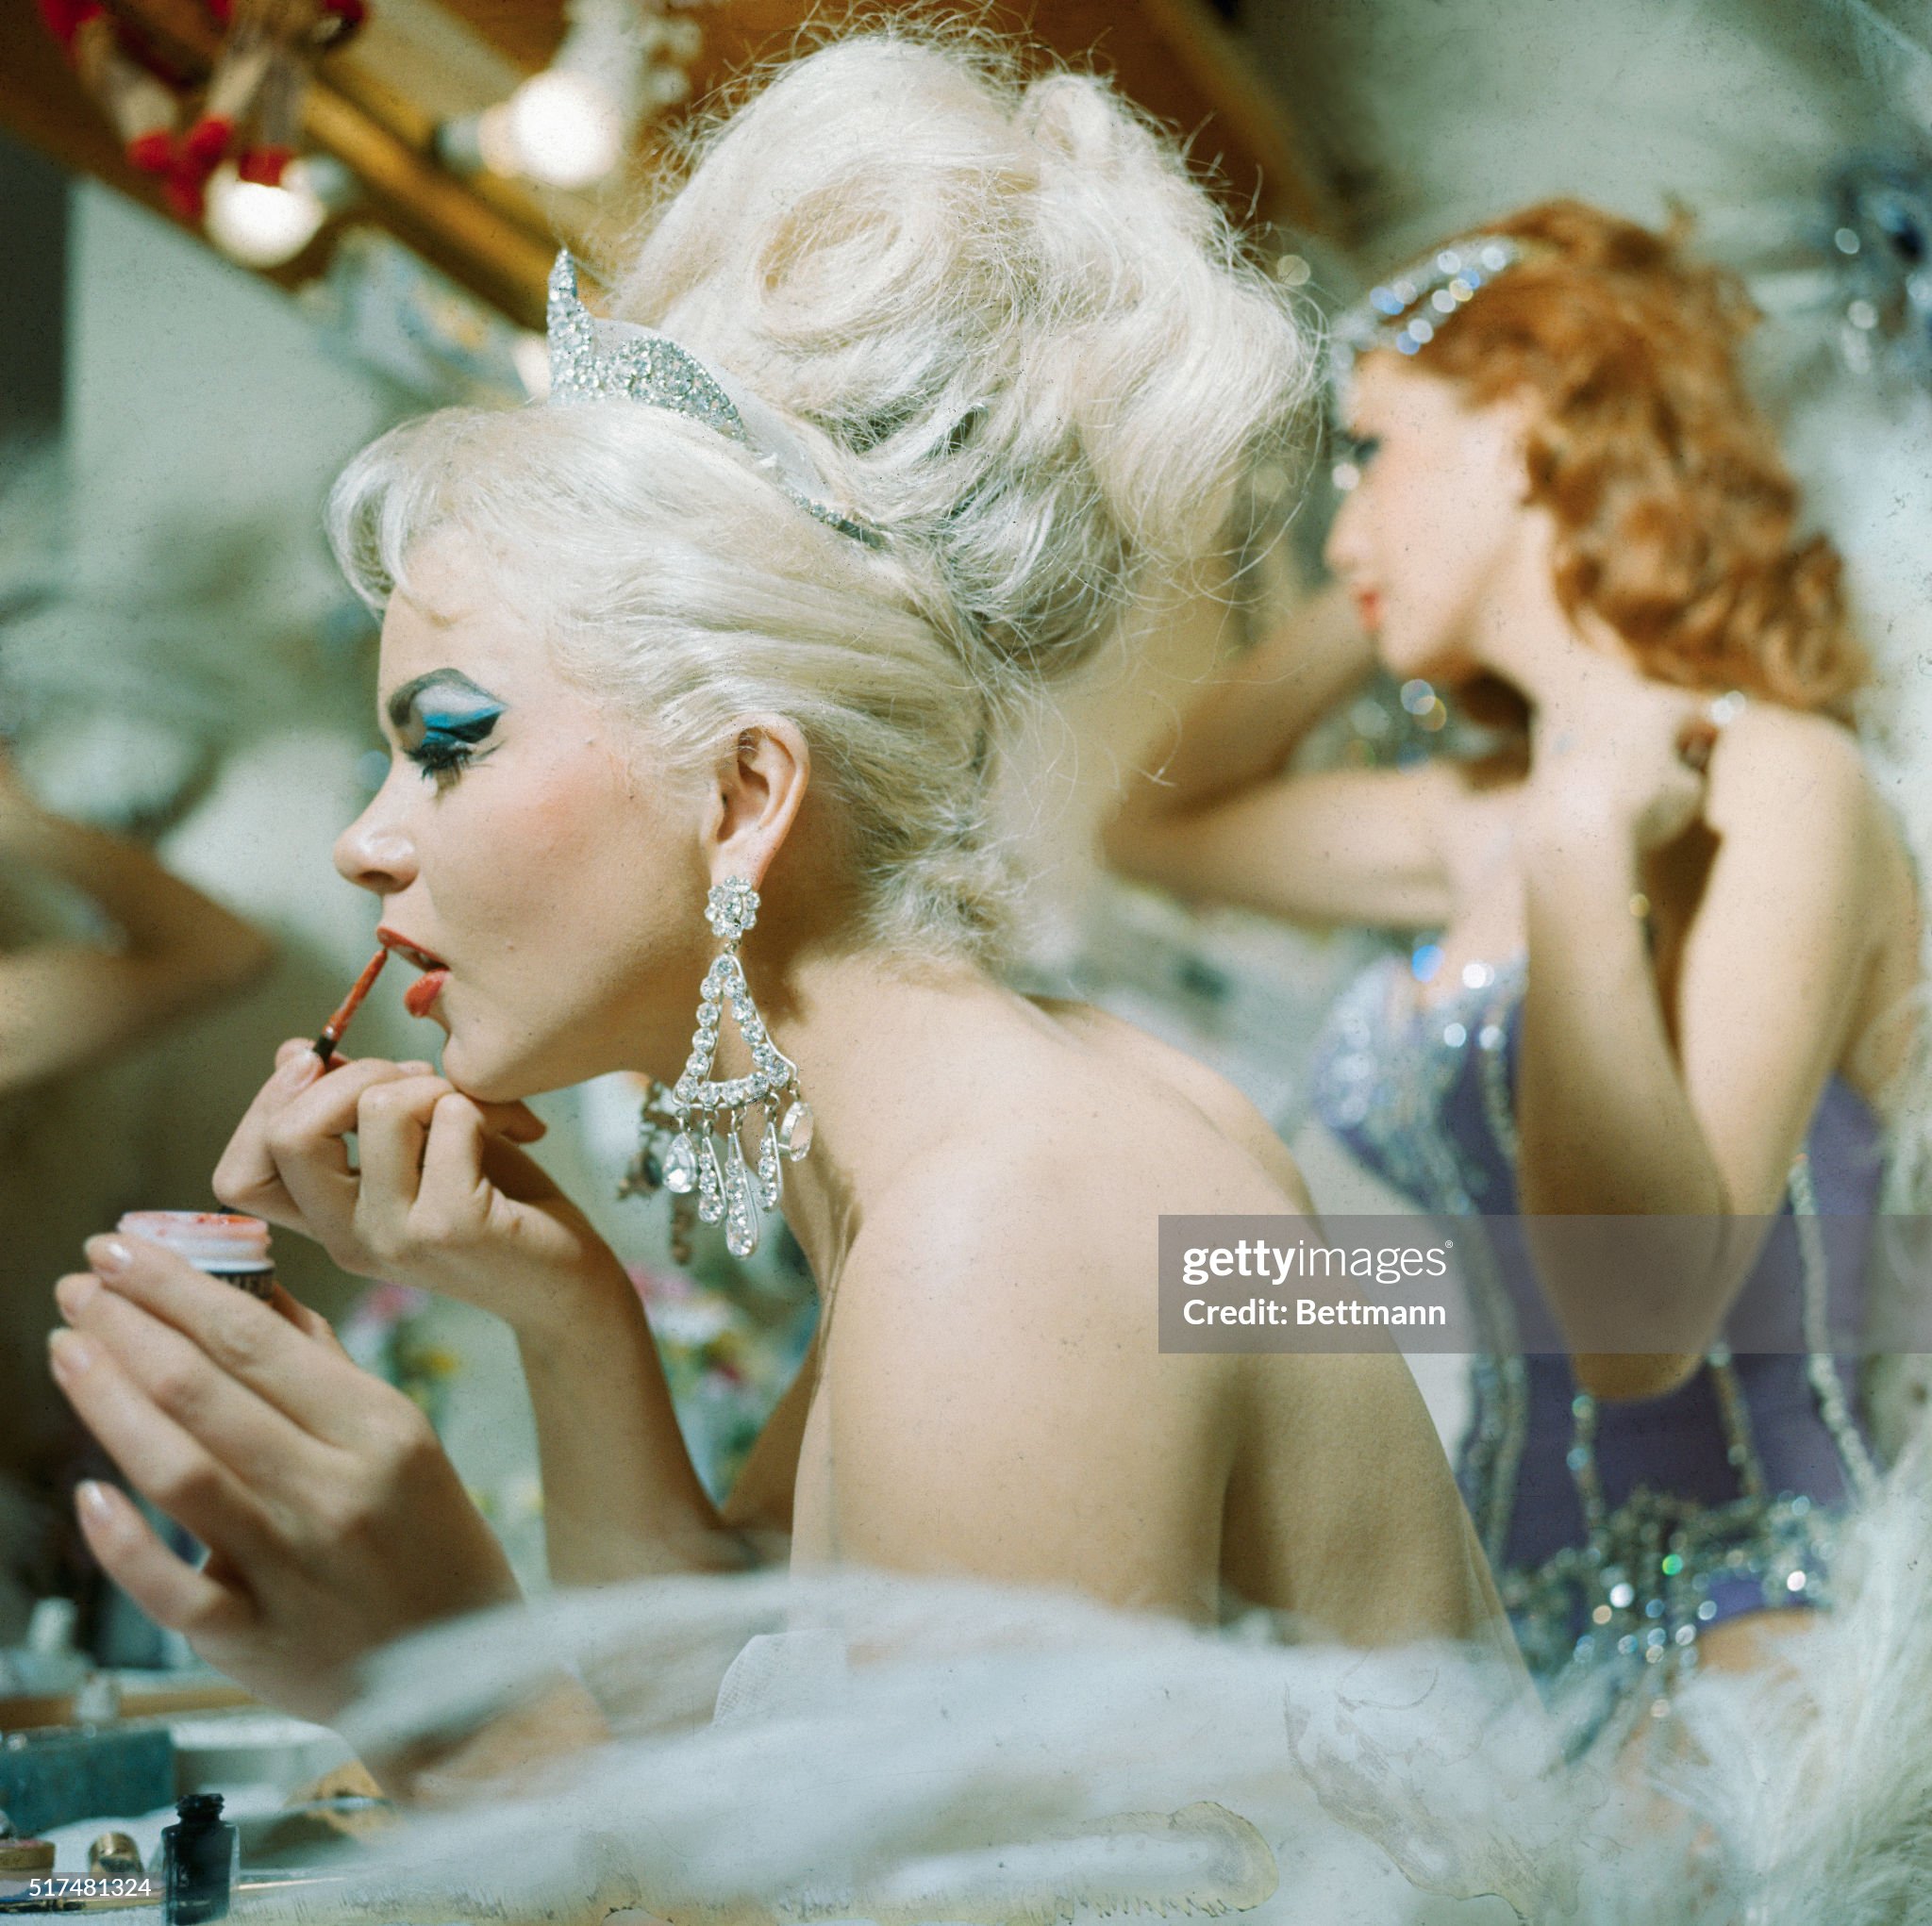 Tropicana dancers dress for a show in 1969 celebrating the centennial of the original Folies Bergere, which opened in Paris in 1869. The show's Las Vegas incarnation has been running since 1961. 